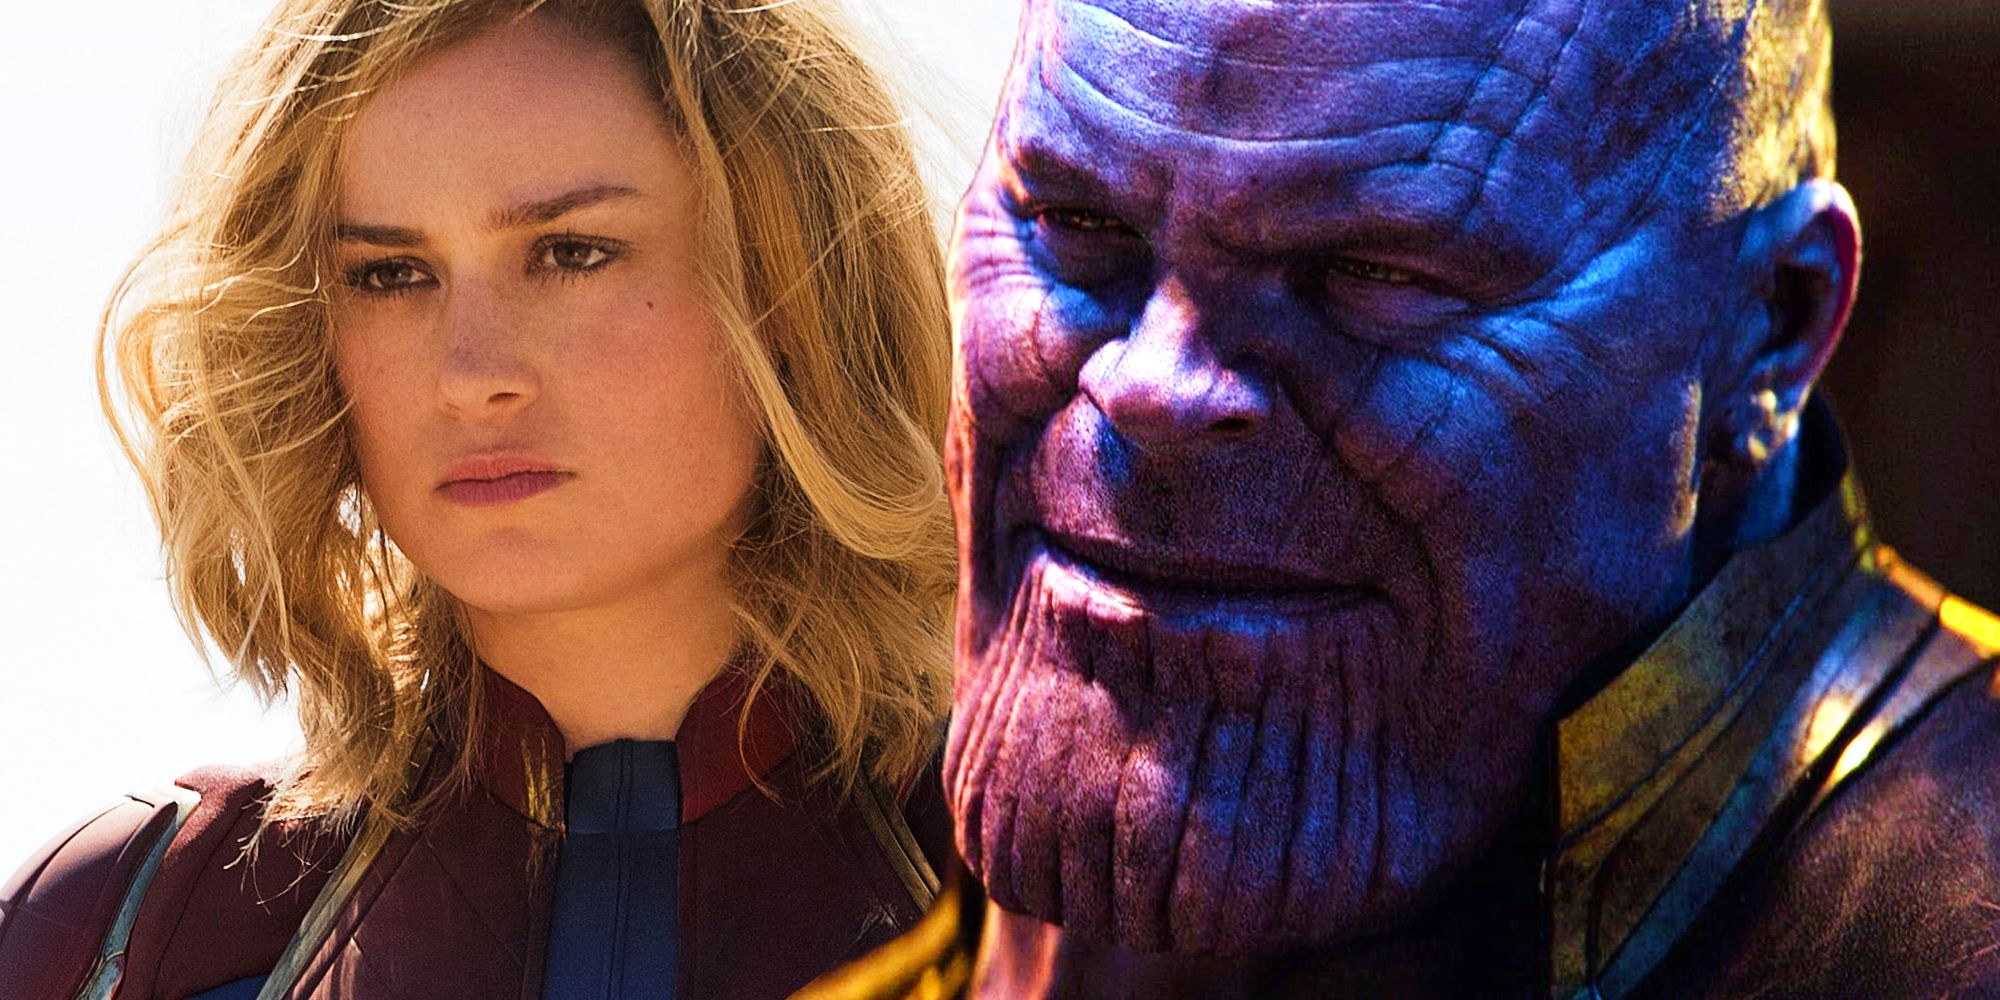 Captain Marvel and Thanos in the MCU